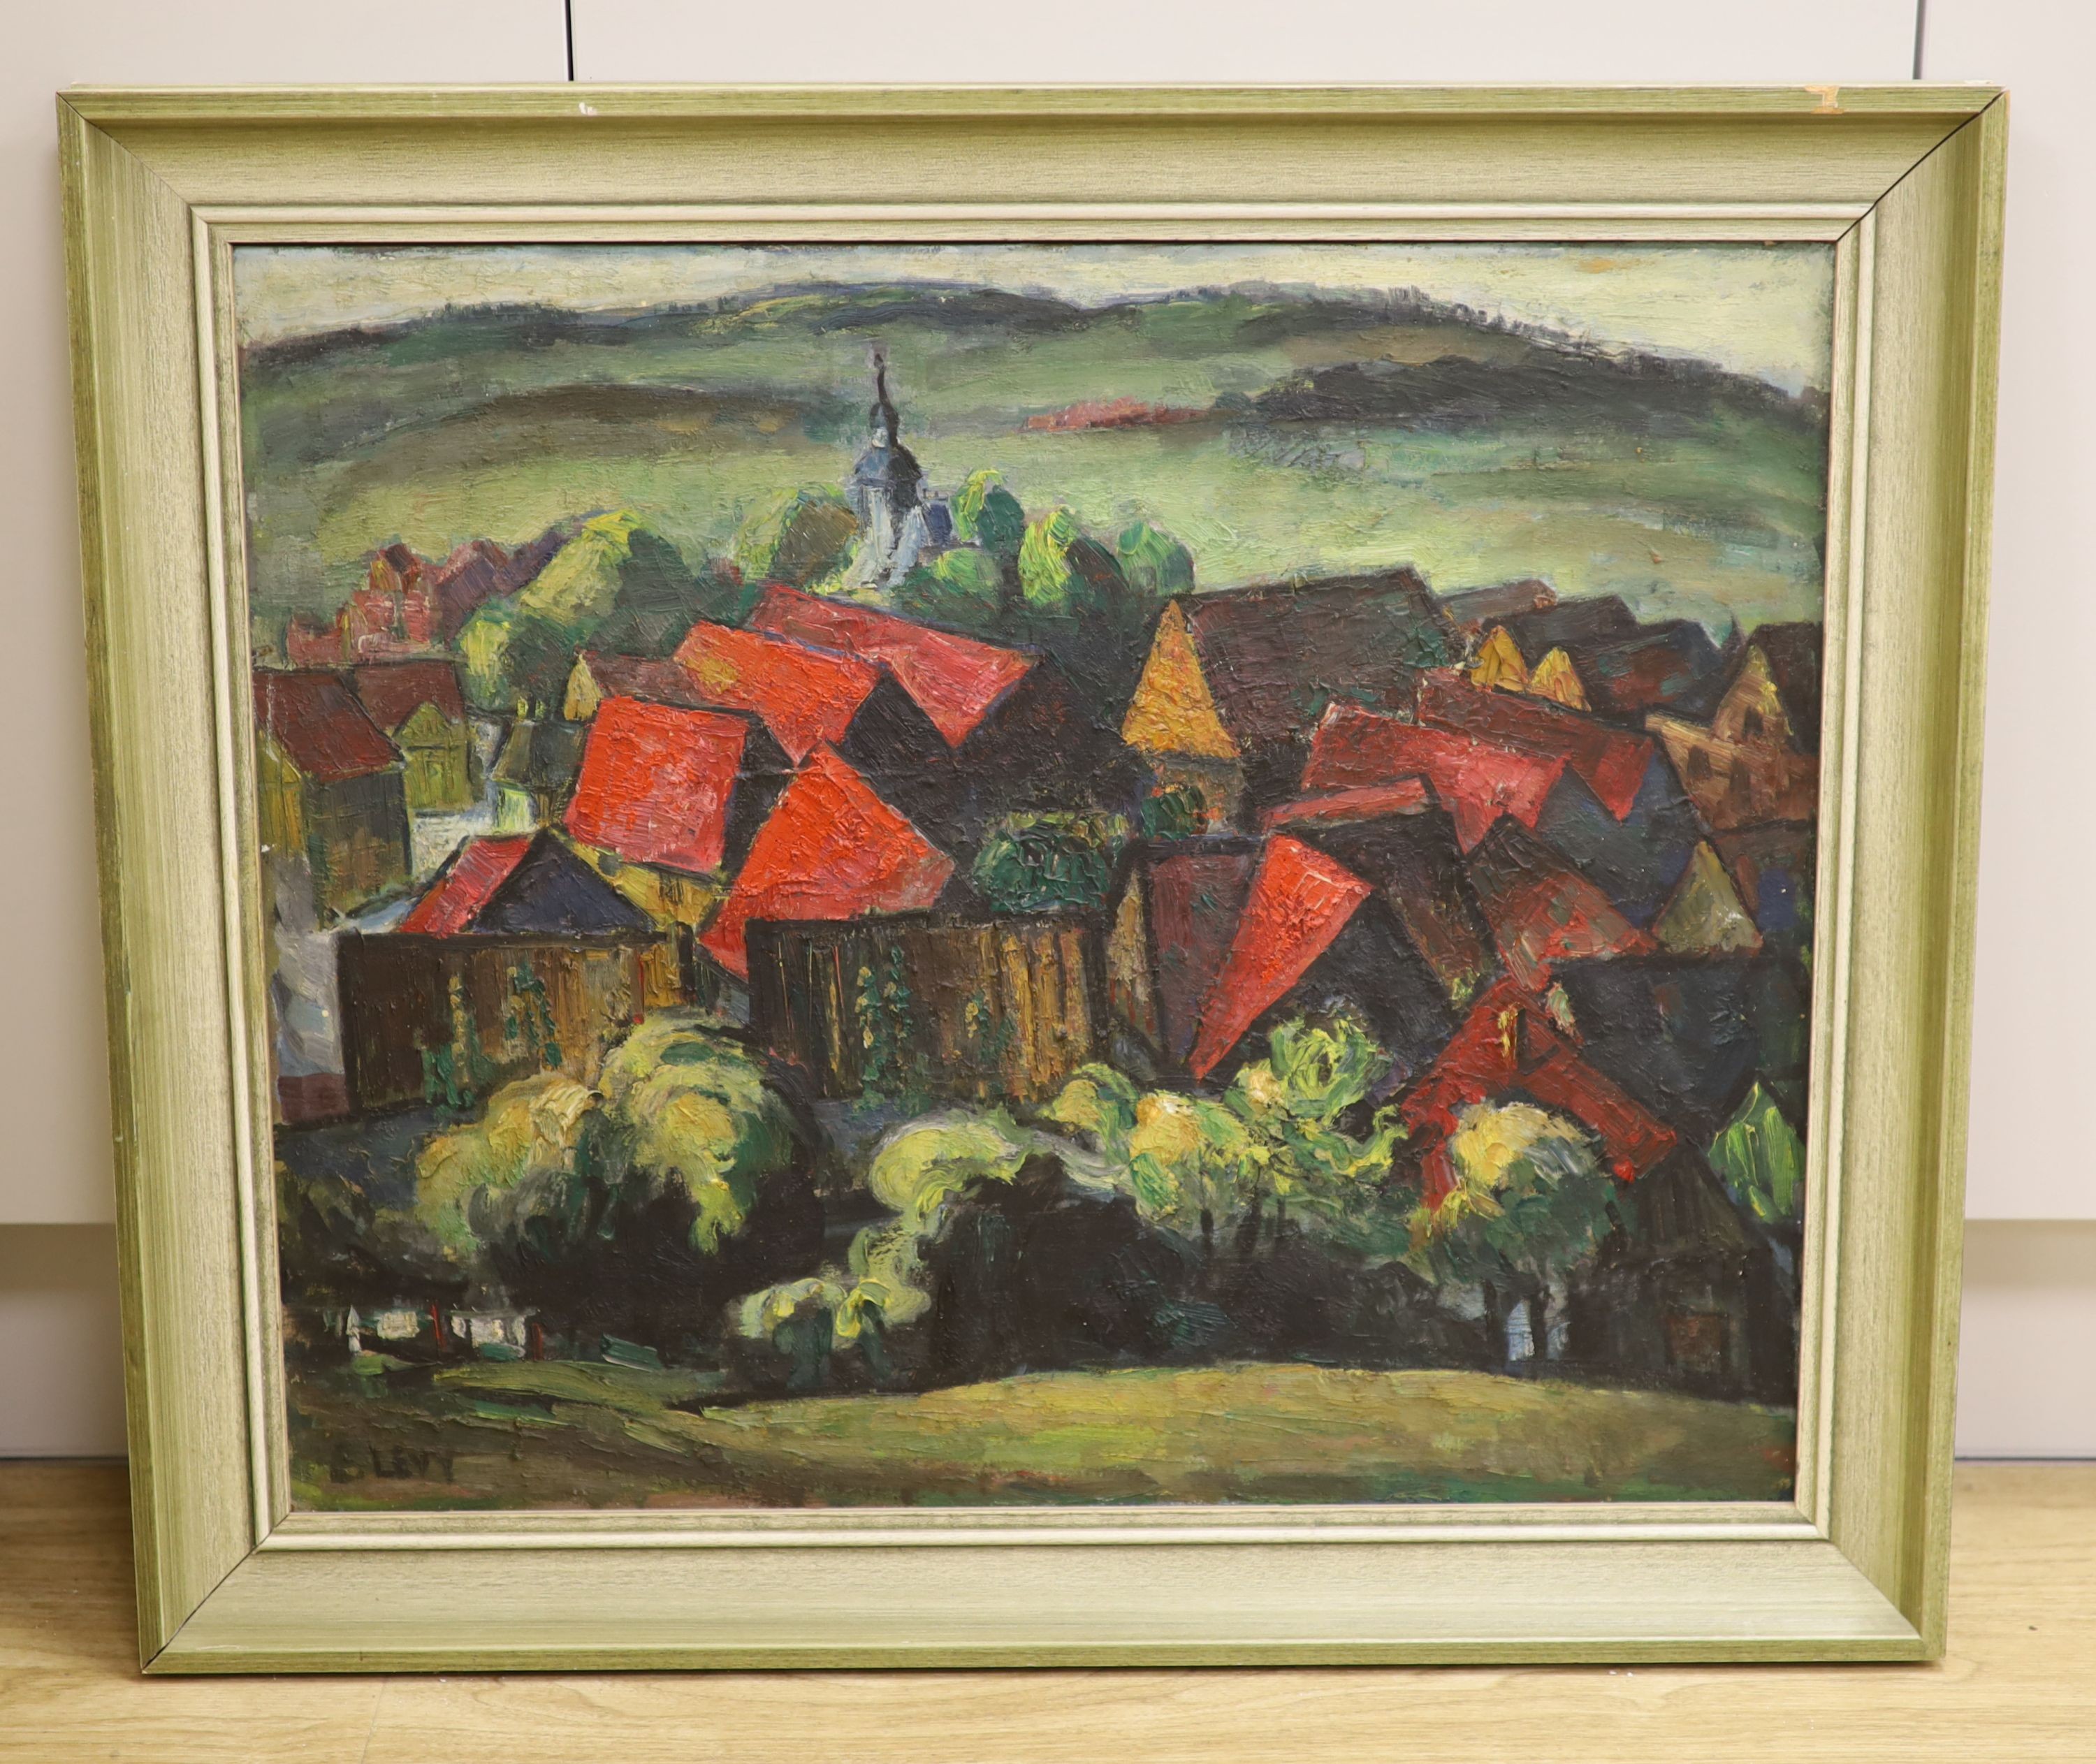 Emmanuel Levy (1900-1986), oil on board, The Red Village, signed with label verso, 50 x 60cm